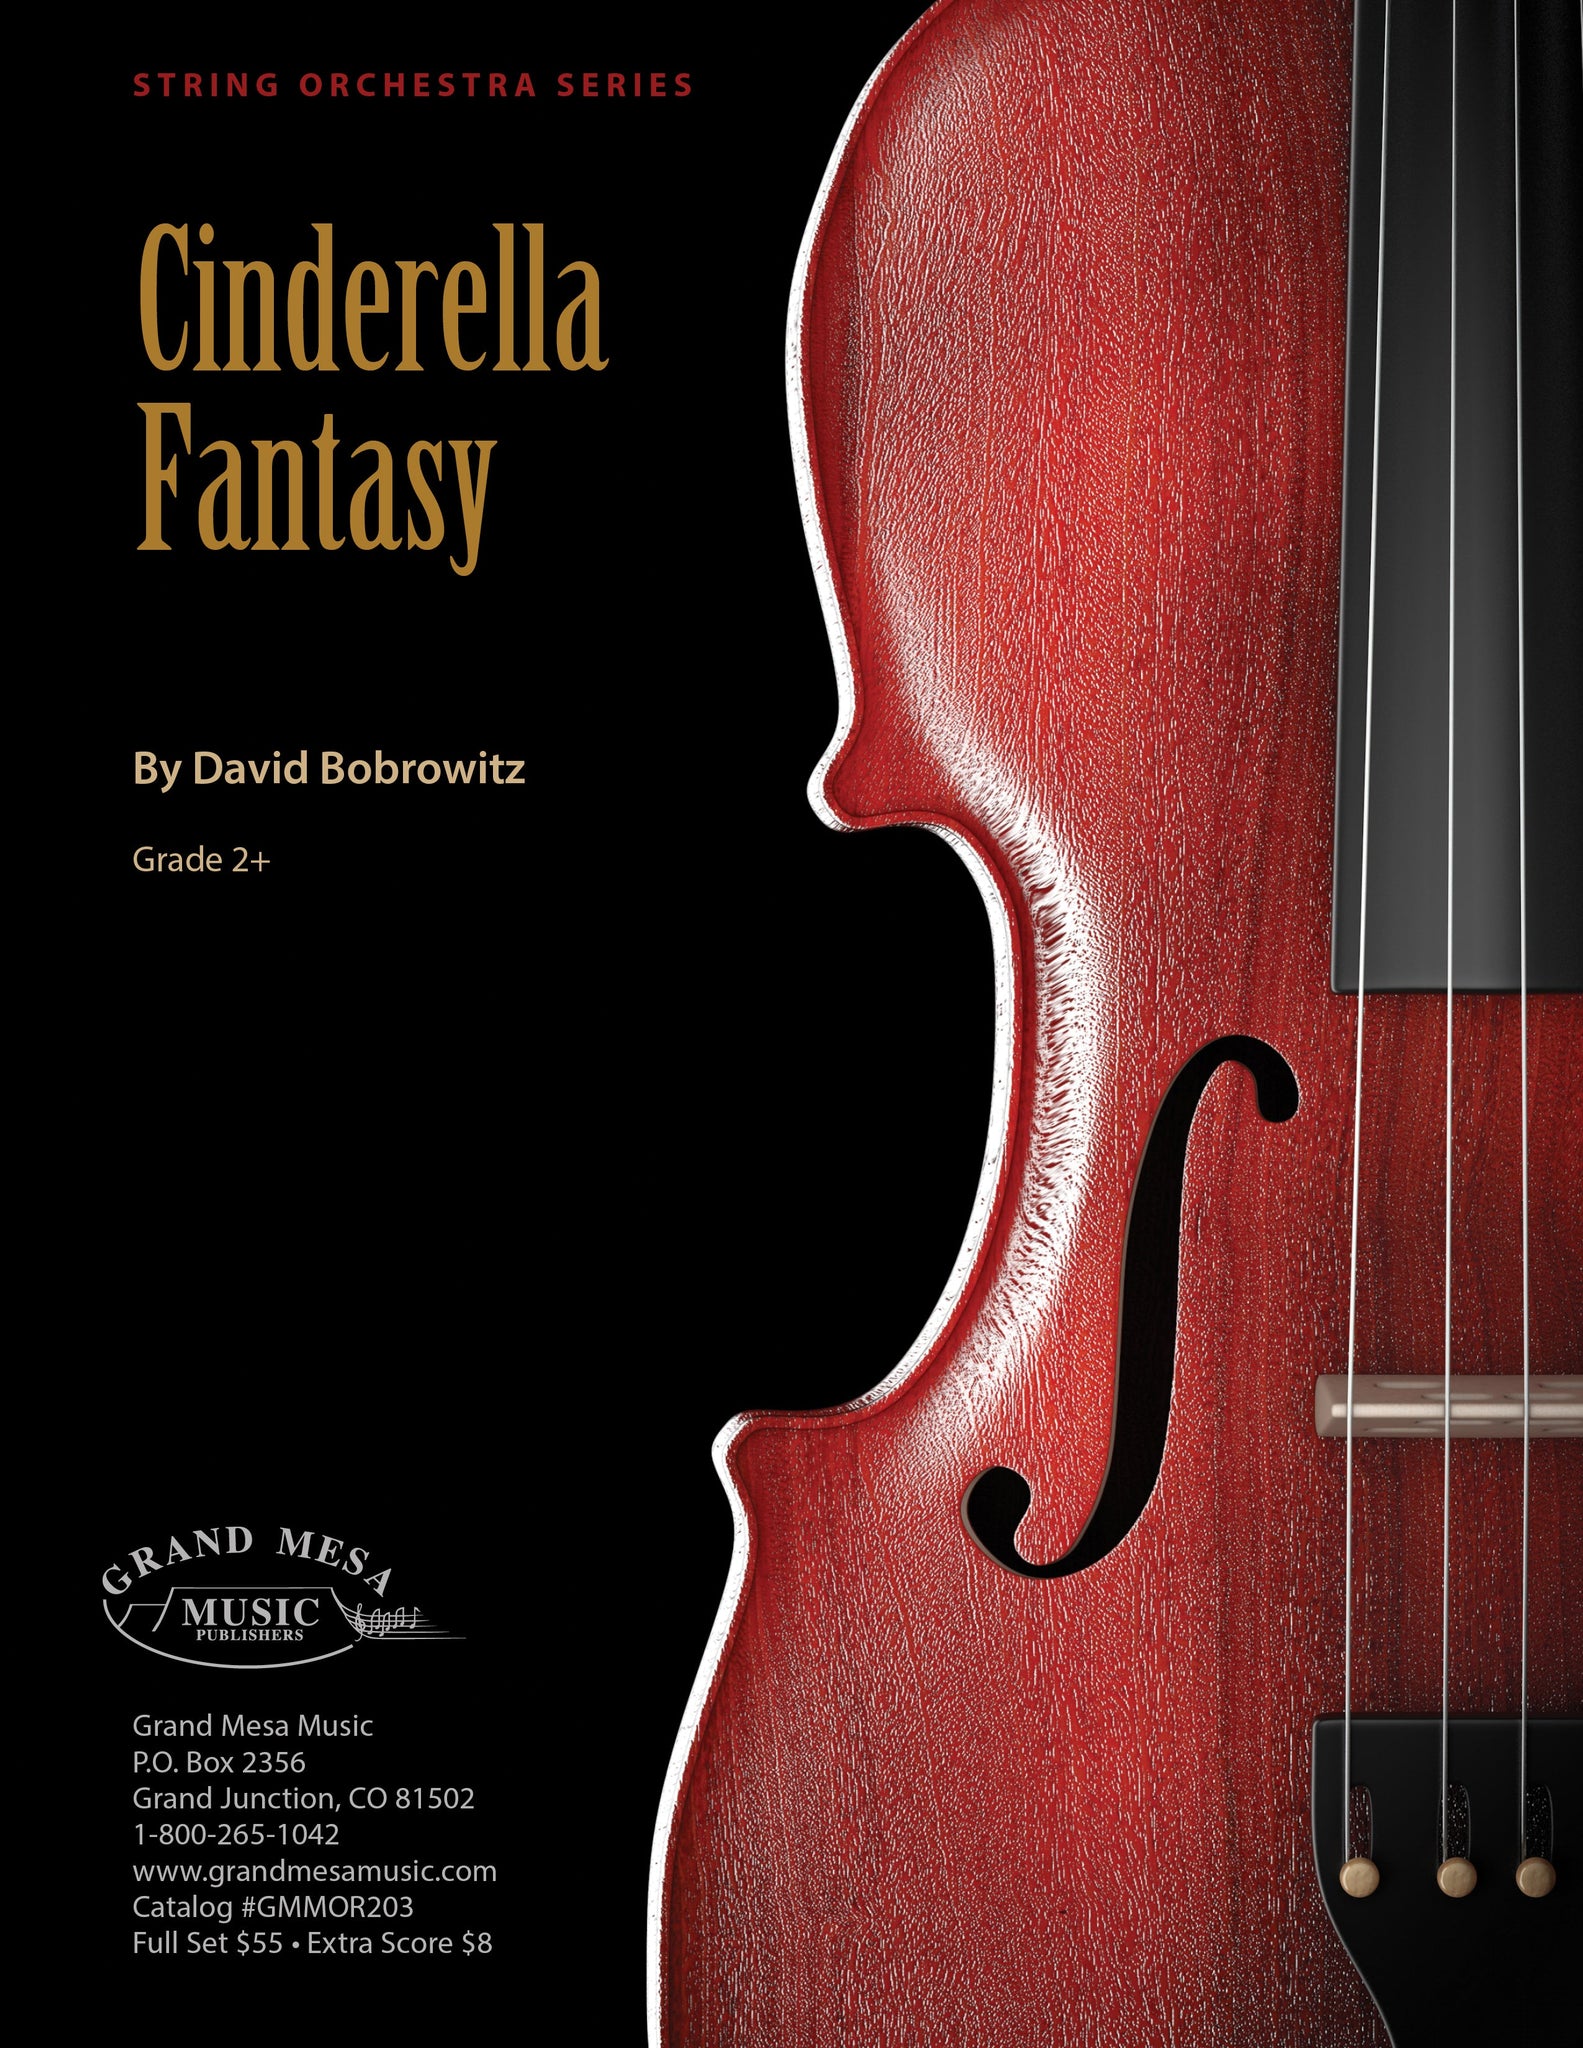 Strings sheet music cover of Cinderella Fantasy, composed by David Bobrowitz.